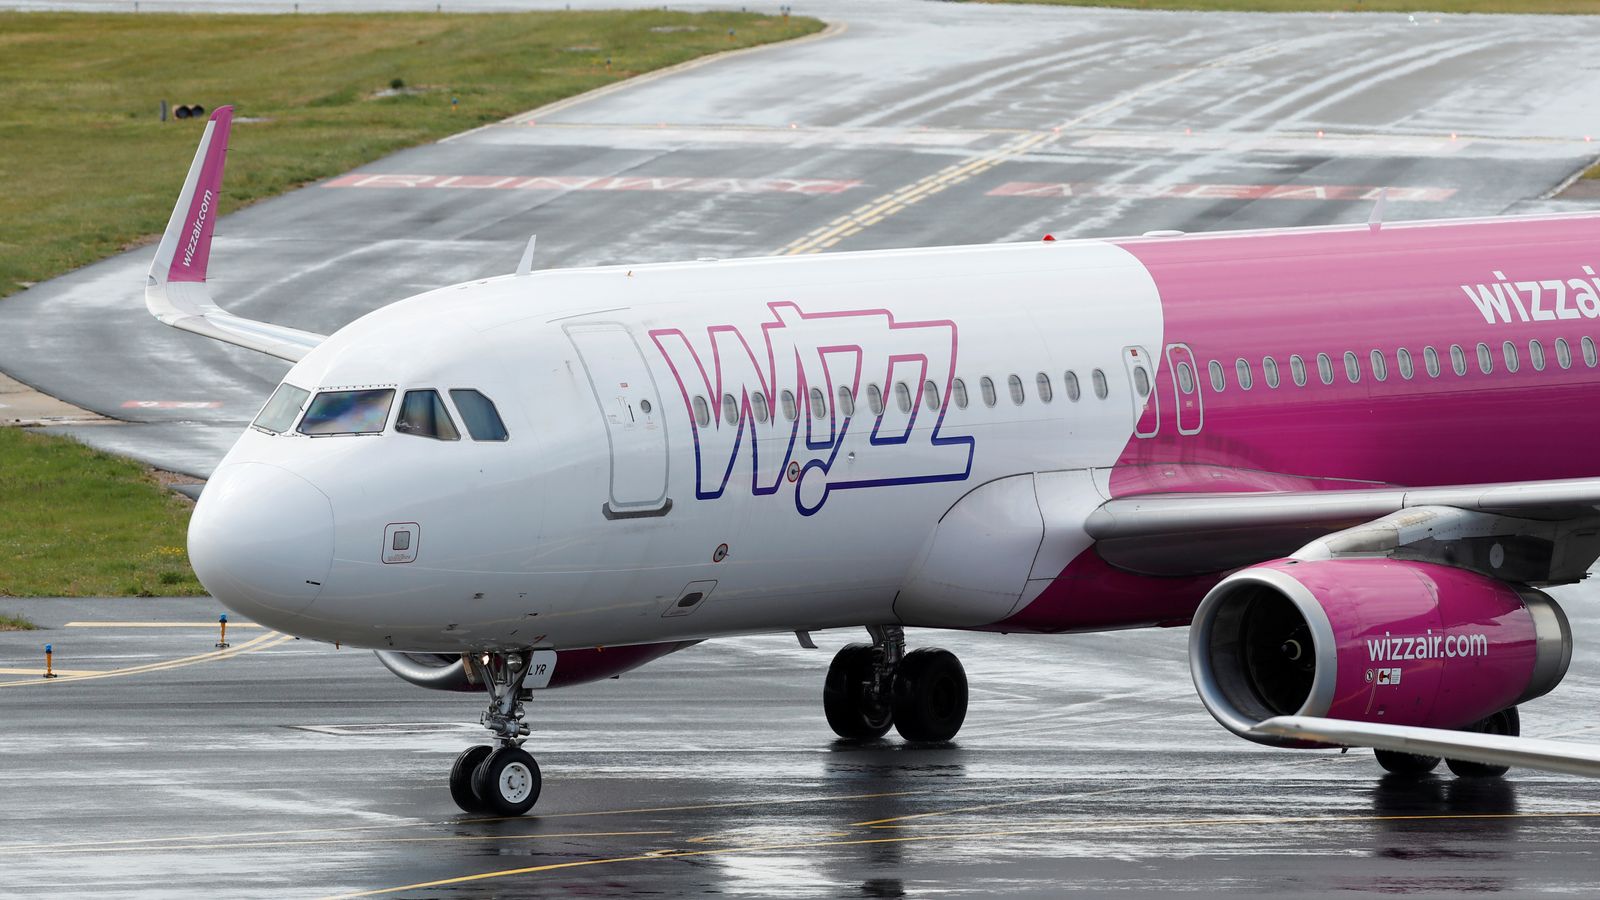 Air fares likely to increase significantly by end of summer, Wizz Air boss says